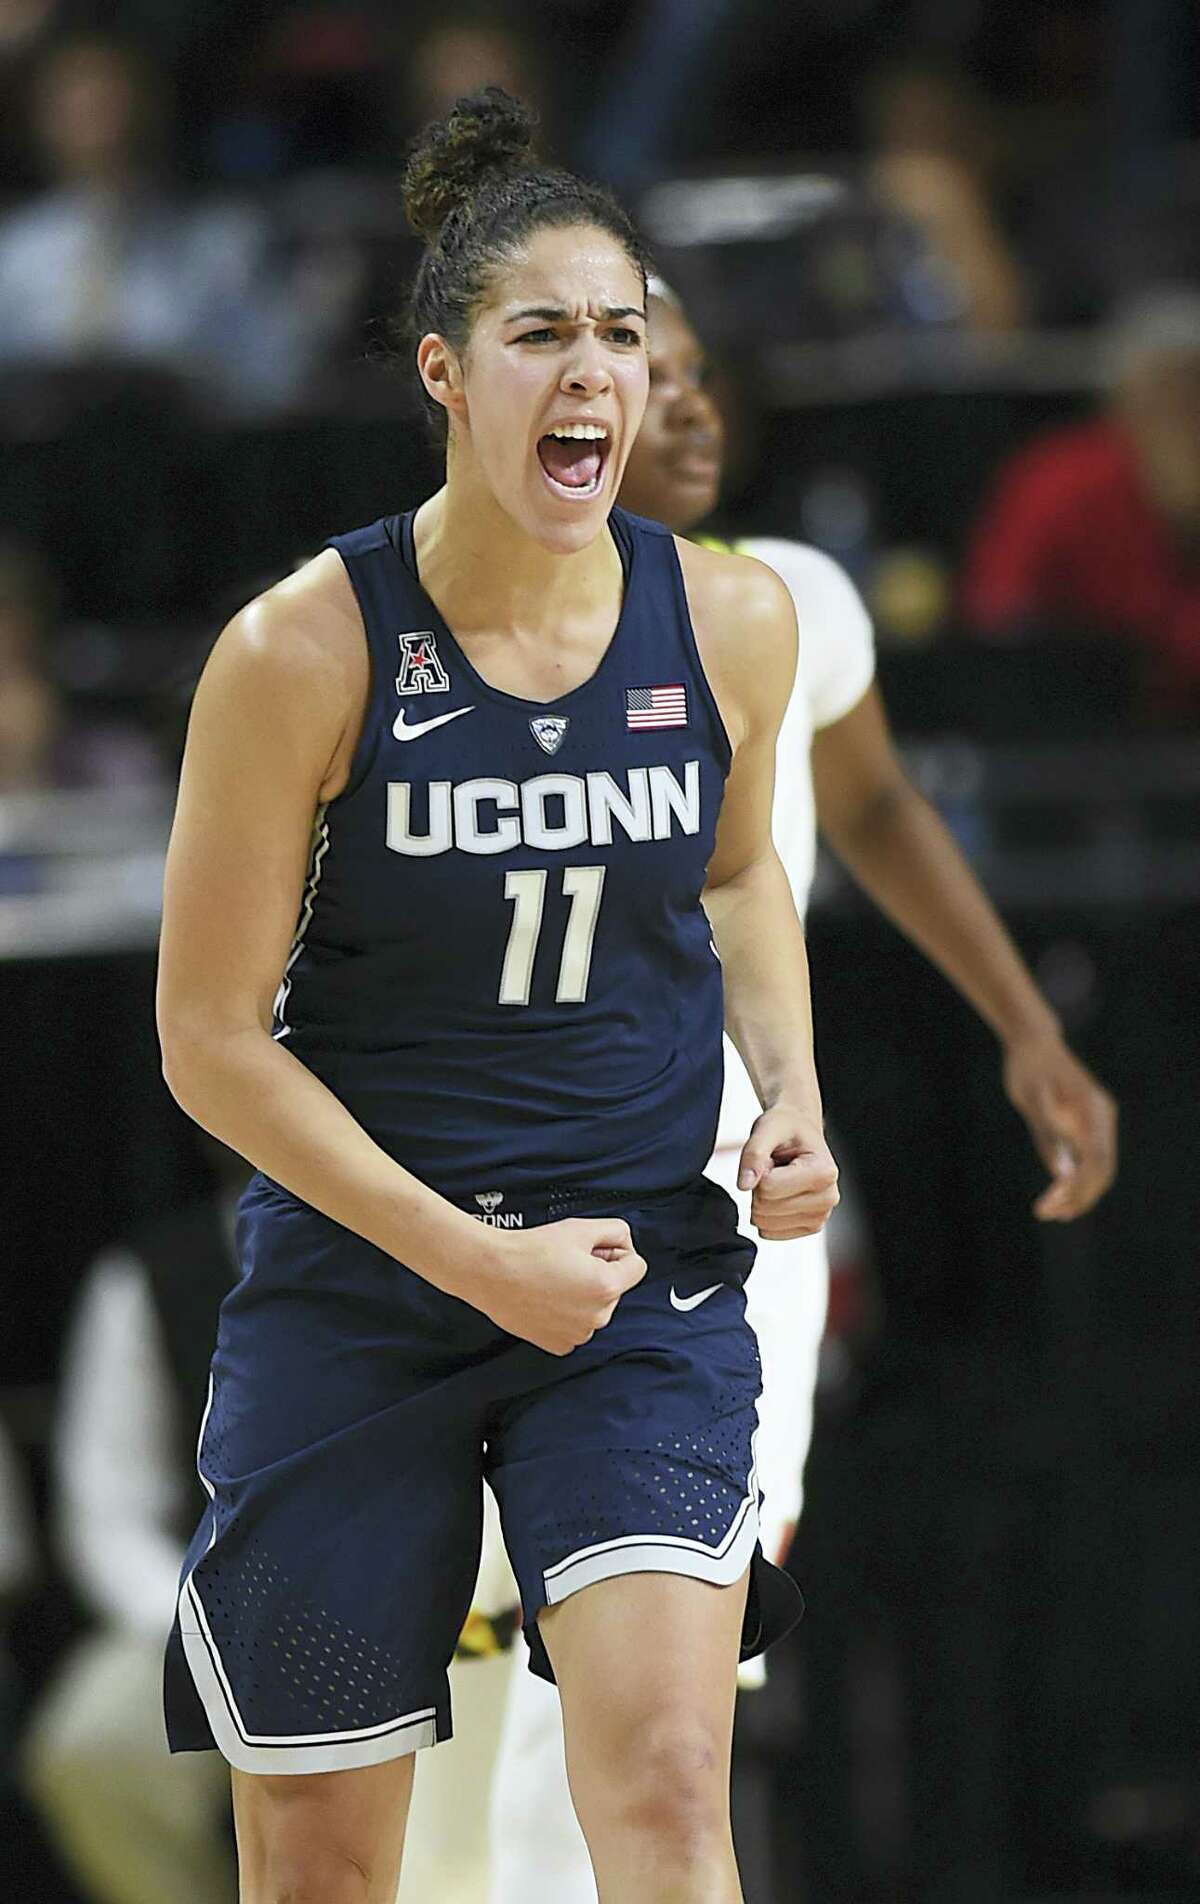 Uconn’s Kia Nurse reacts after connecting on a 3-pointer.